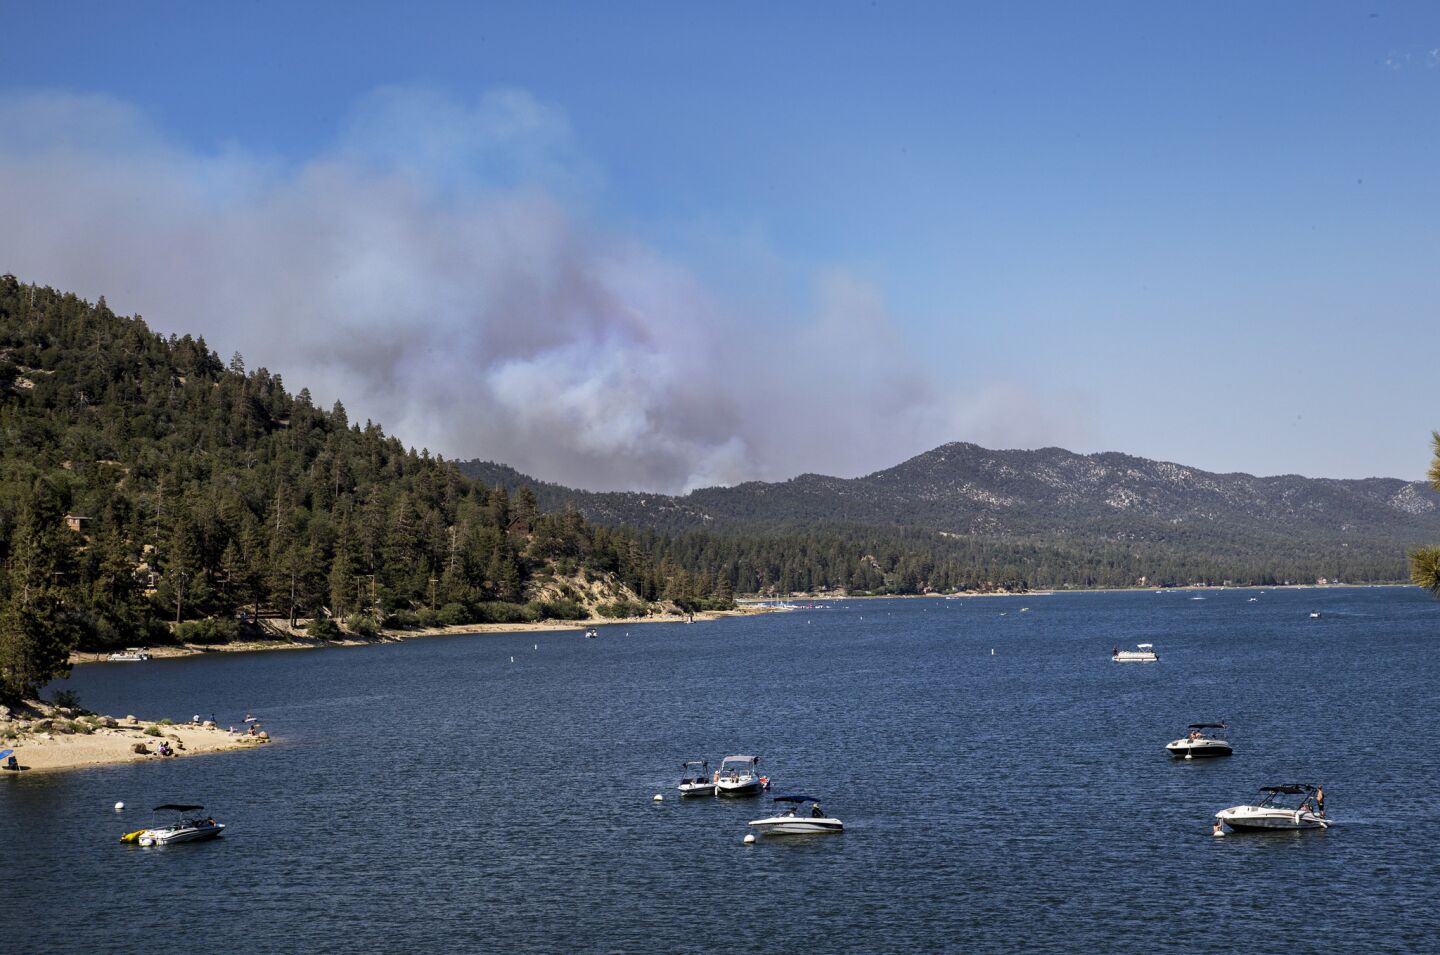 Boaters relax on Big Bear Lake as a giant plume from the Holcomb fire burns nearby in rugged terrain in the San Bernardino National Forest.